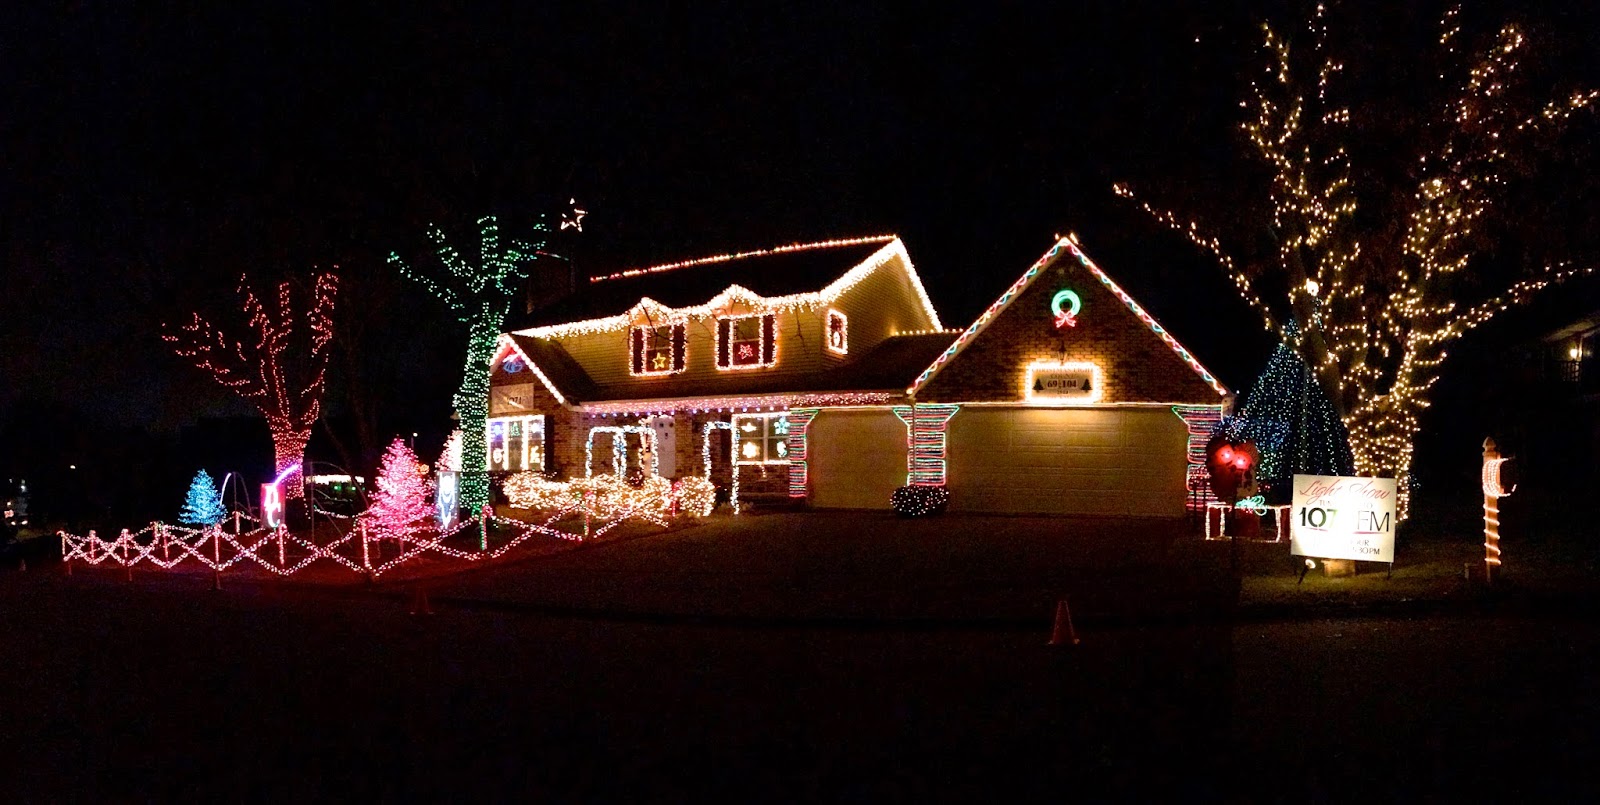 This Little House of Mine: Christmas Lights by the River